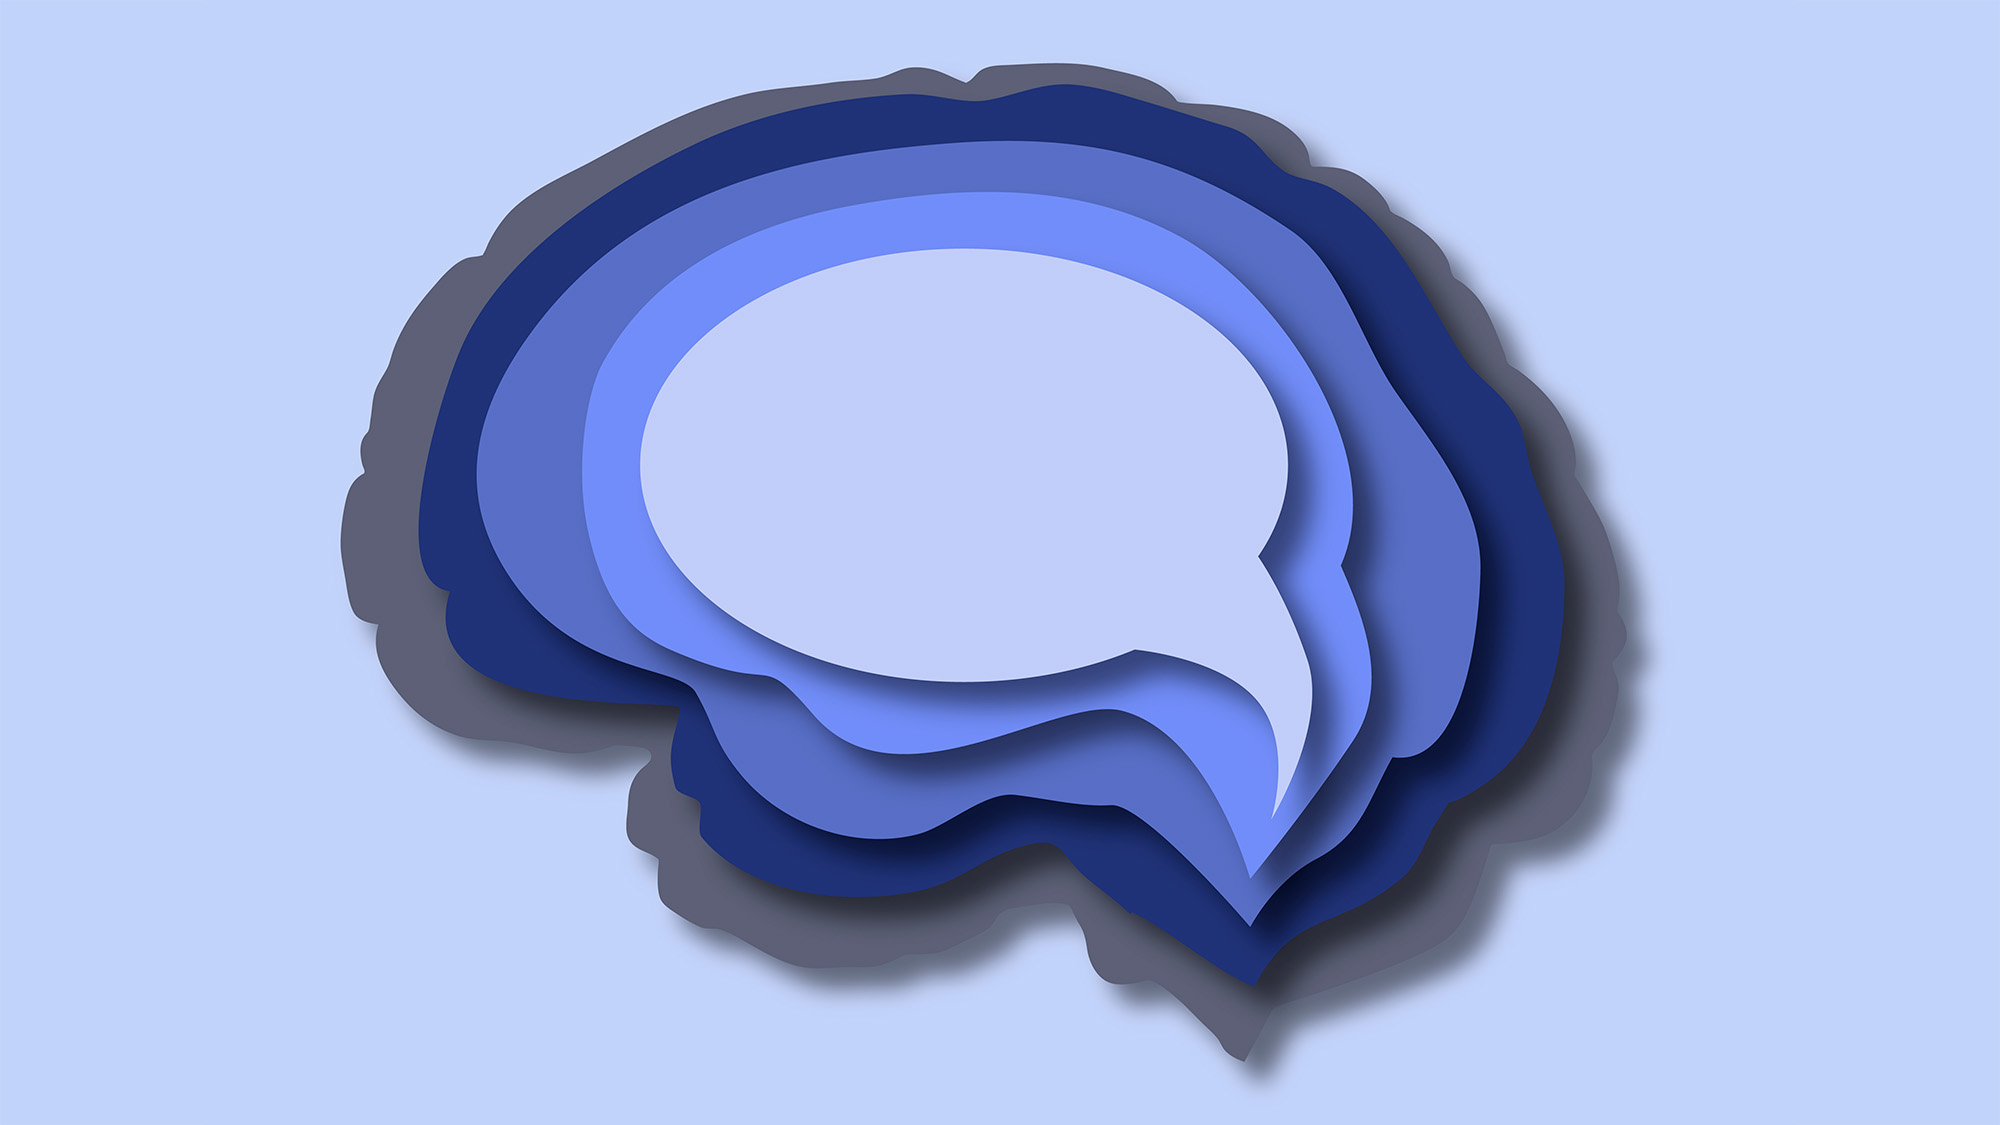 An illustration of a brain with different size speech bubbles nested inside it, symbolizing speech in the brain